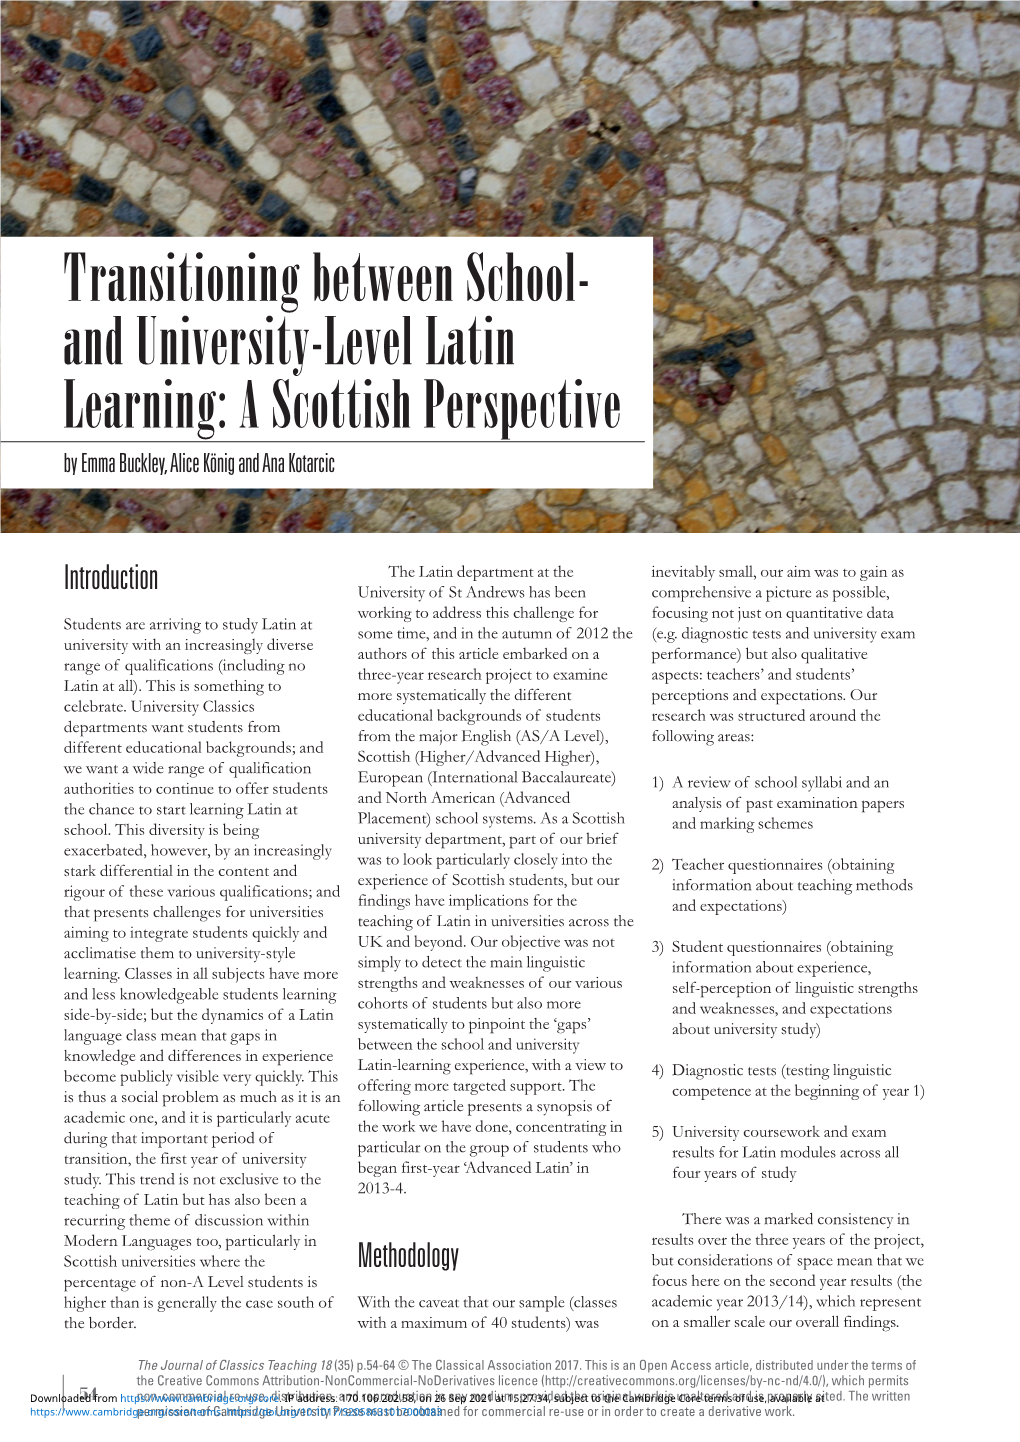 Transitioning Between School- and University-Level Latin Learning: a Scottish Perspective by Emma Buckley, Alice König and Ana Kotarcic